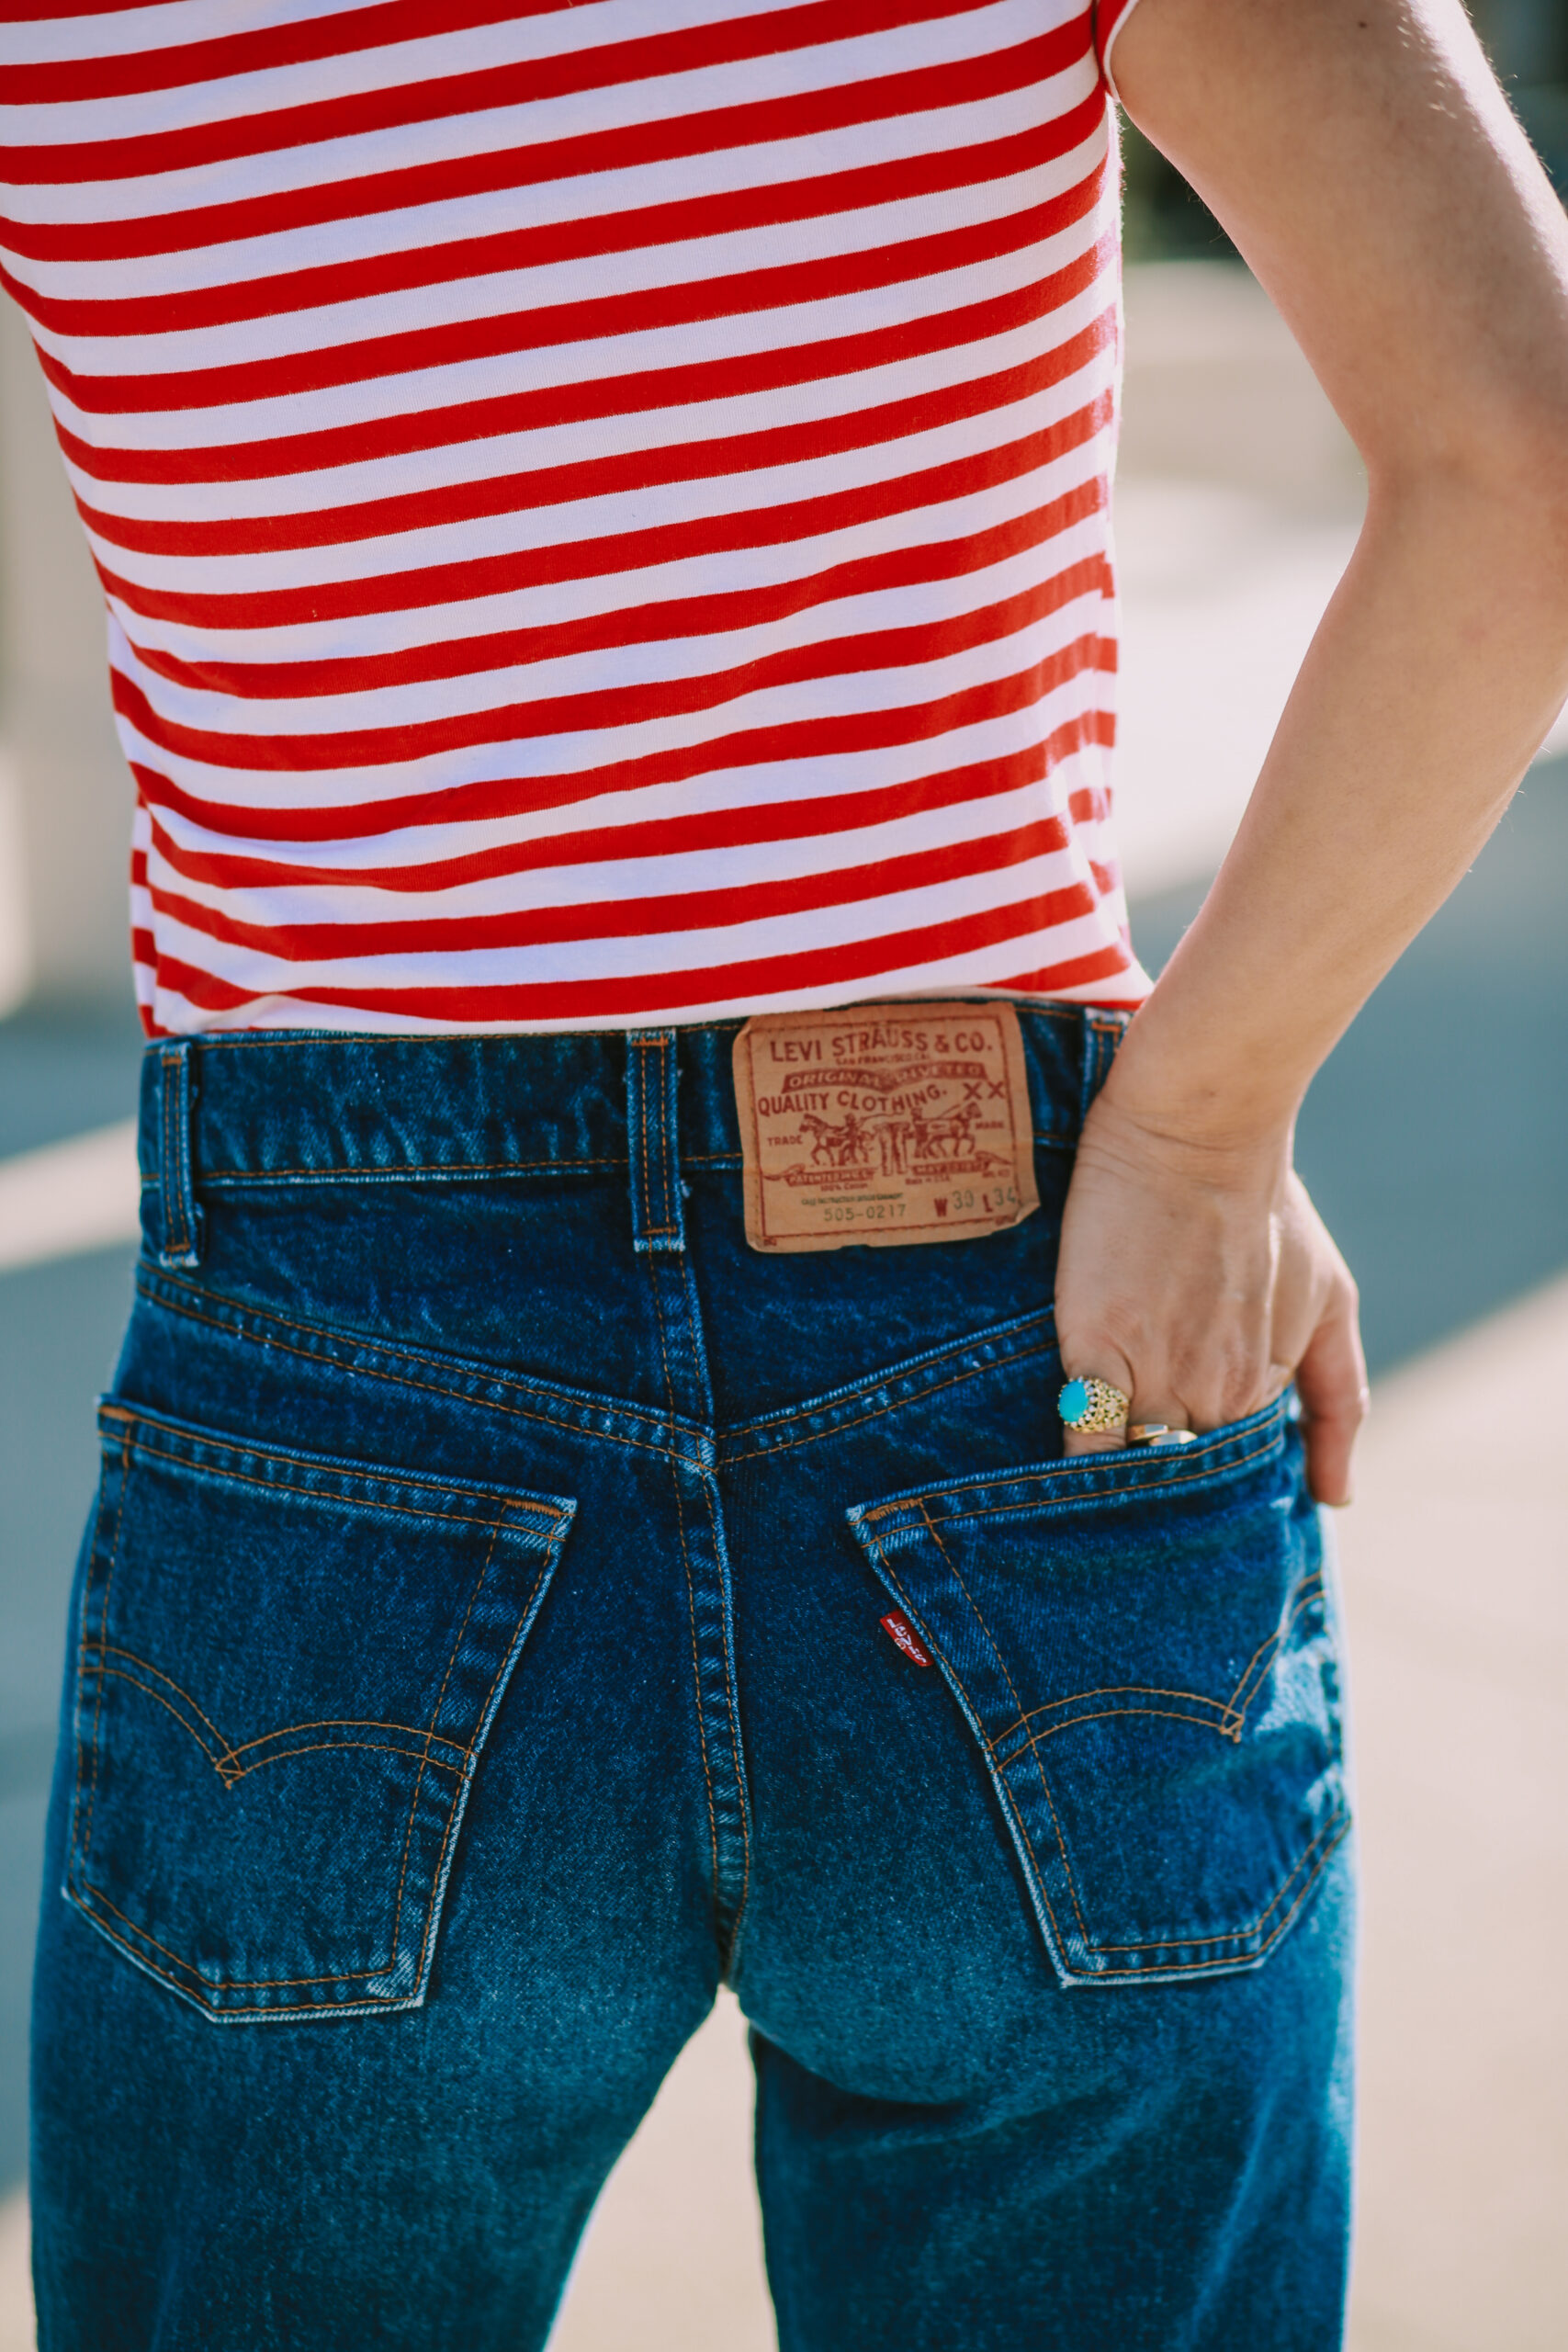 The Ultimate Guide to Vintage Levi's: Styles and Where to Buy Them